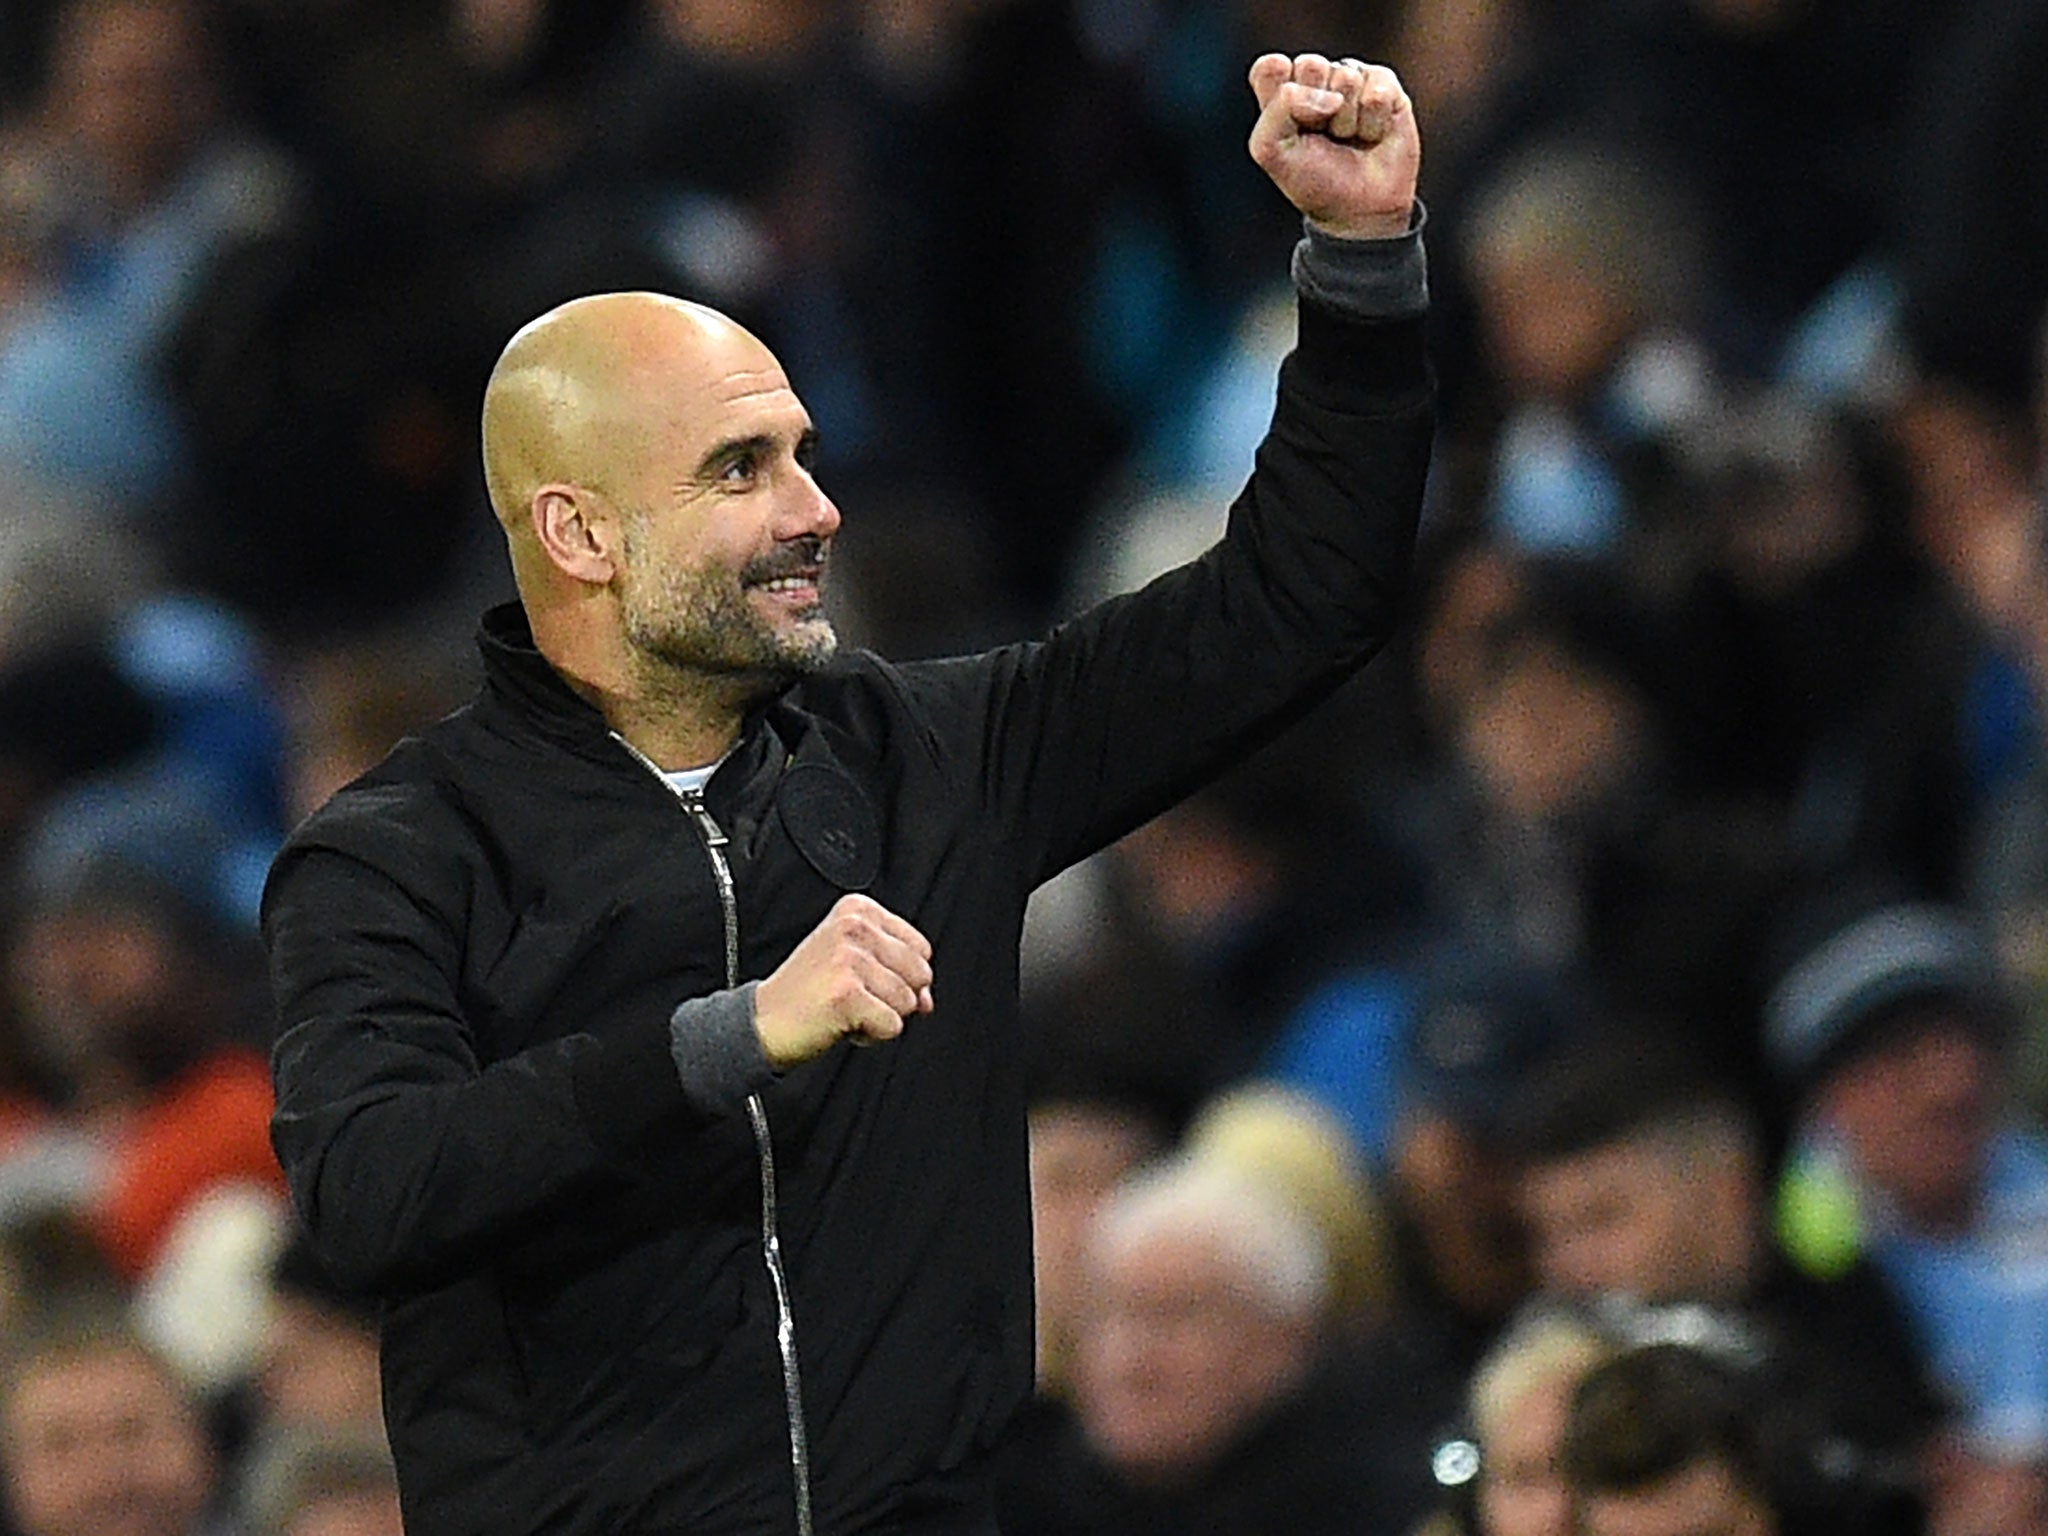 Pep Guardiola celebrates after his side's victory over West Ham